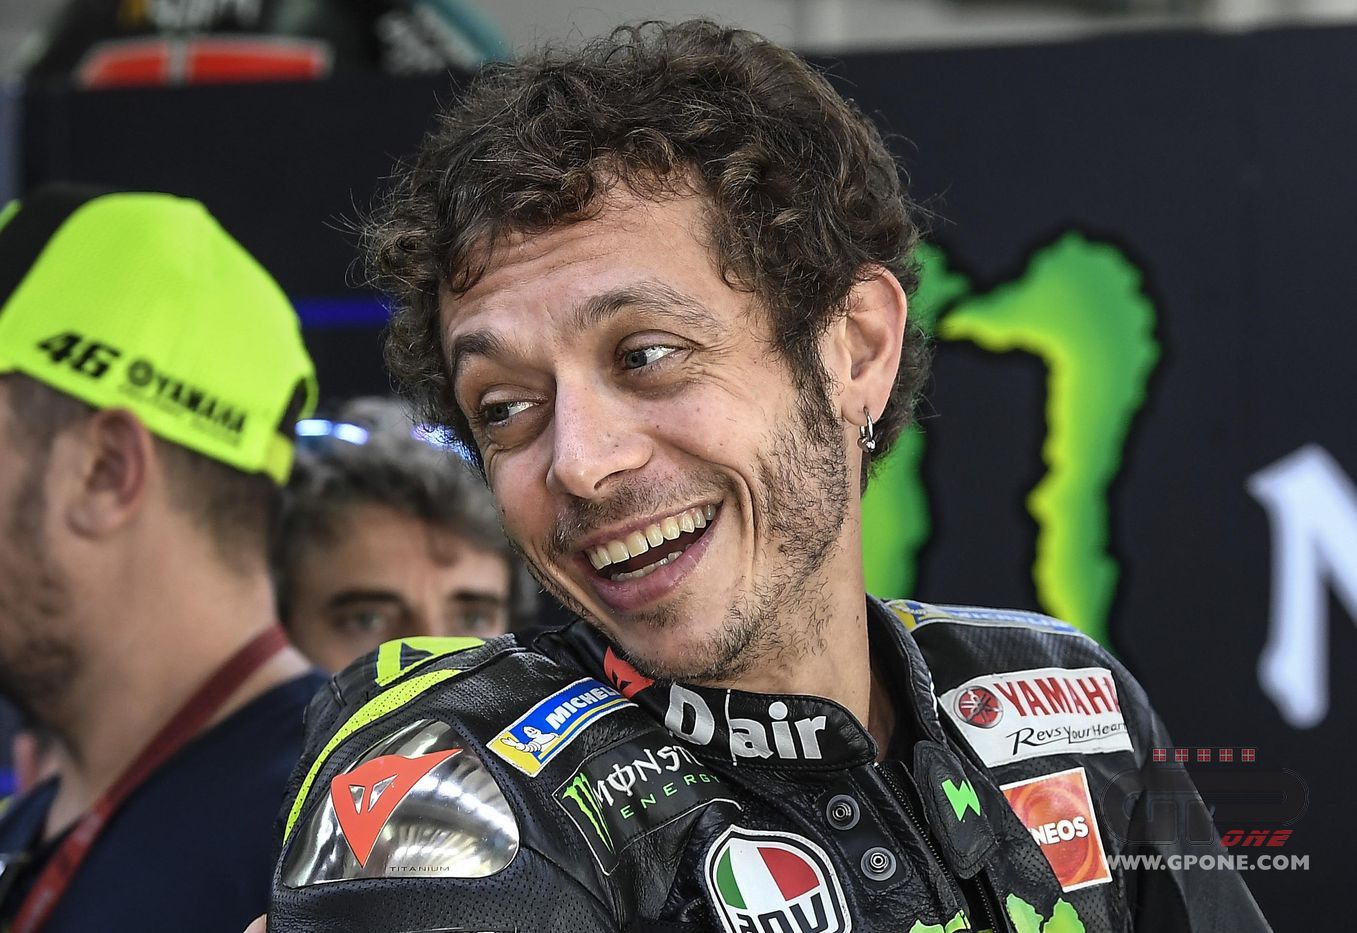 The decline of Valentino Rossi: “he who laughs last, laughs longest ...